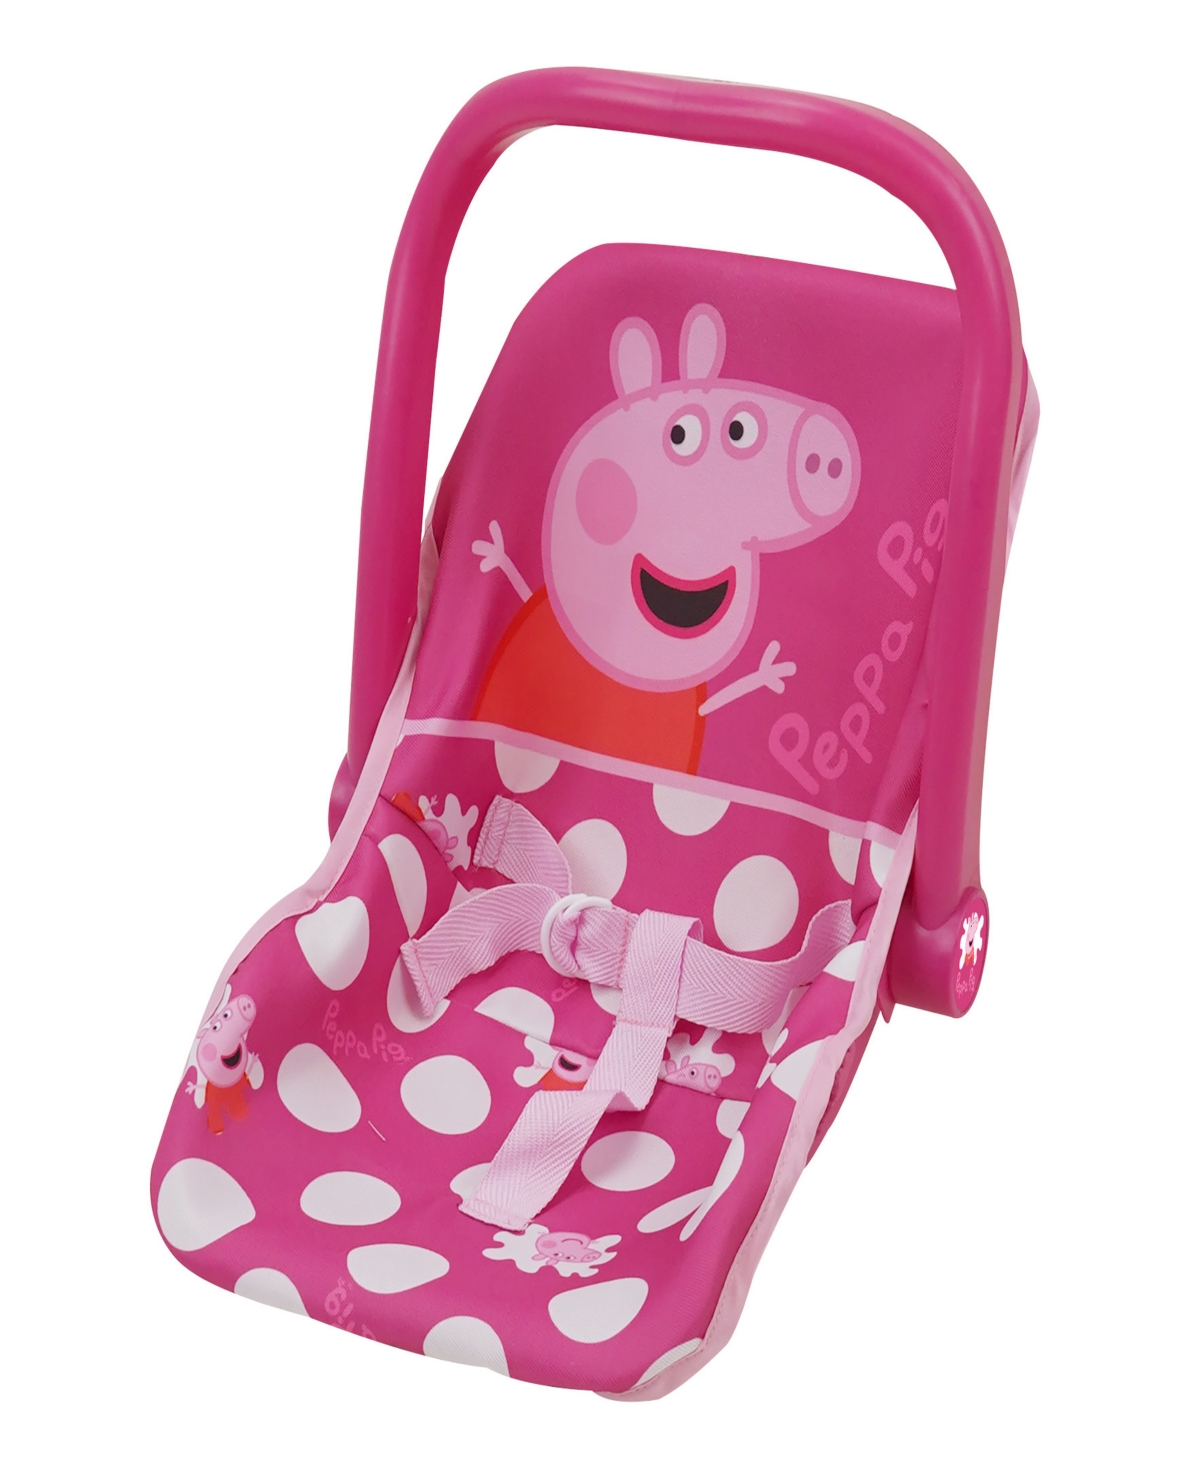 Peppa Pig Baby Doll Pink White Dots Car Seat In Multi